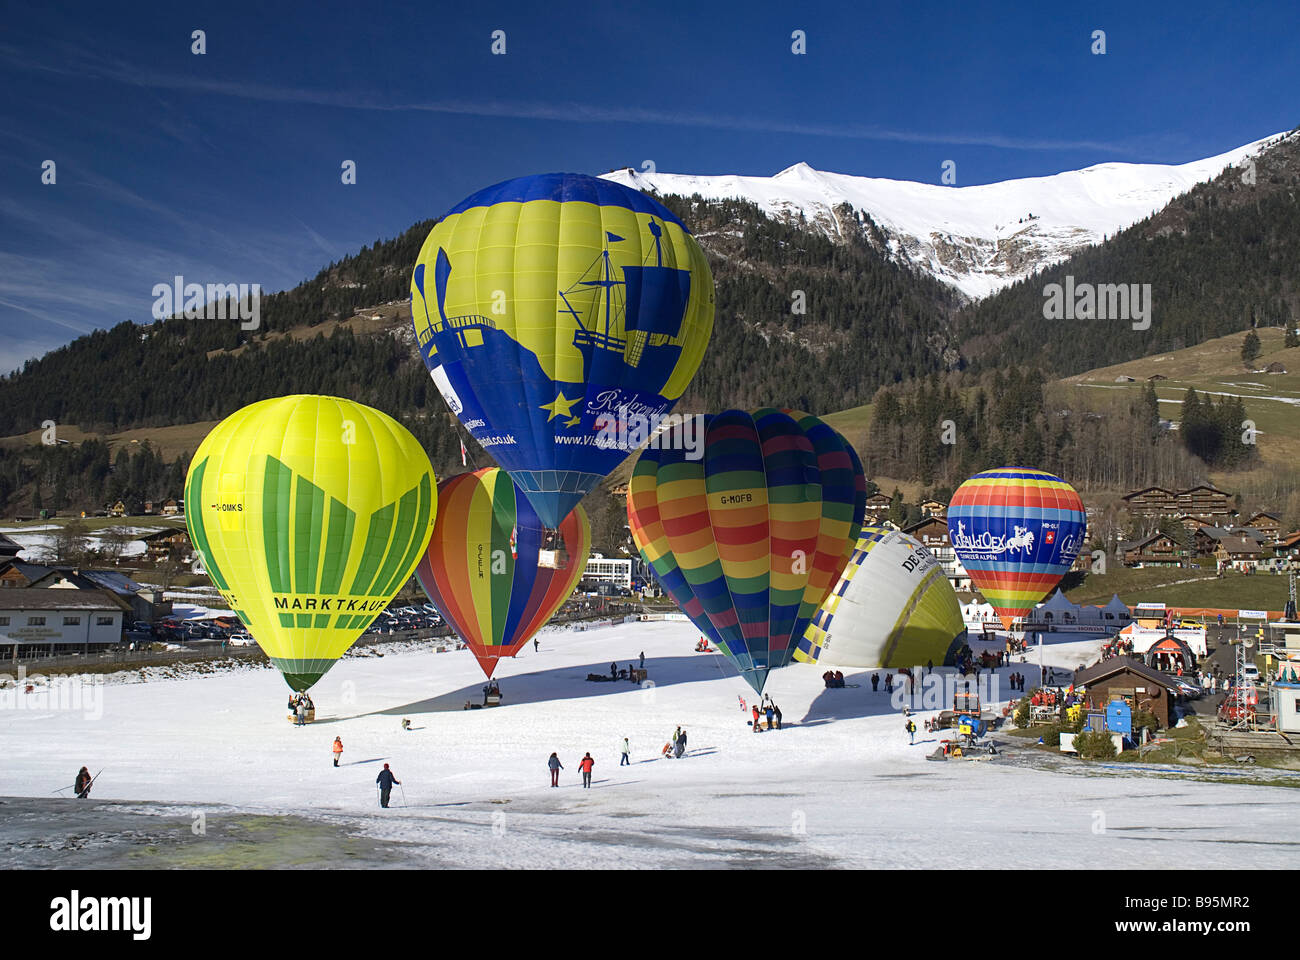 Switzerland, Canton de Vaud Chateau d'Oex, Hot Air Balloon Festival.  Colourful balloons taking off from village Stock Photo - Alamy